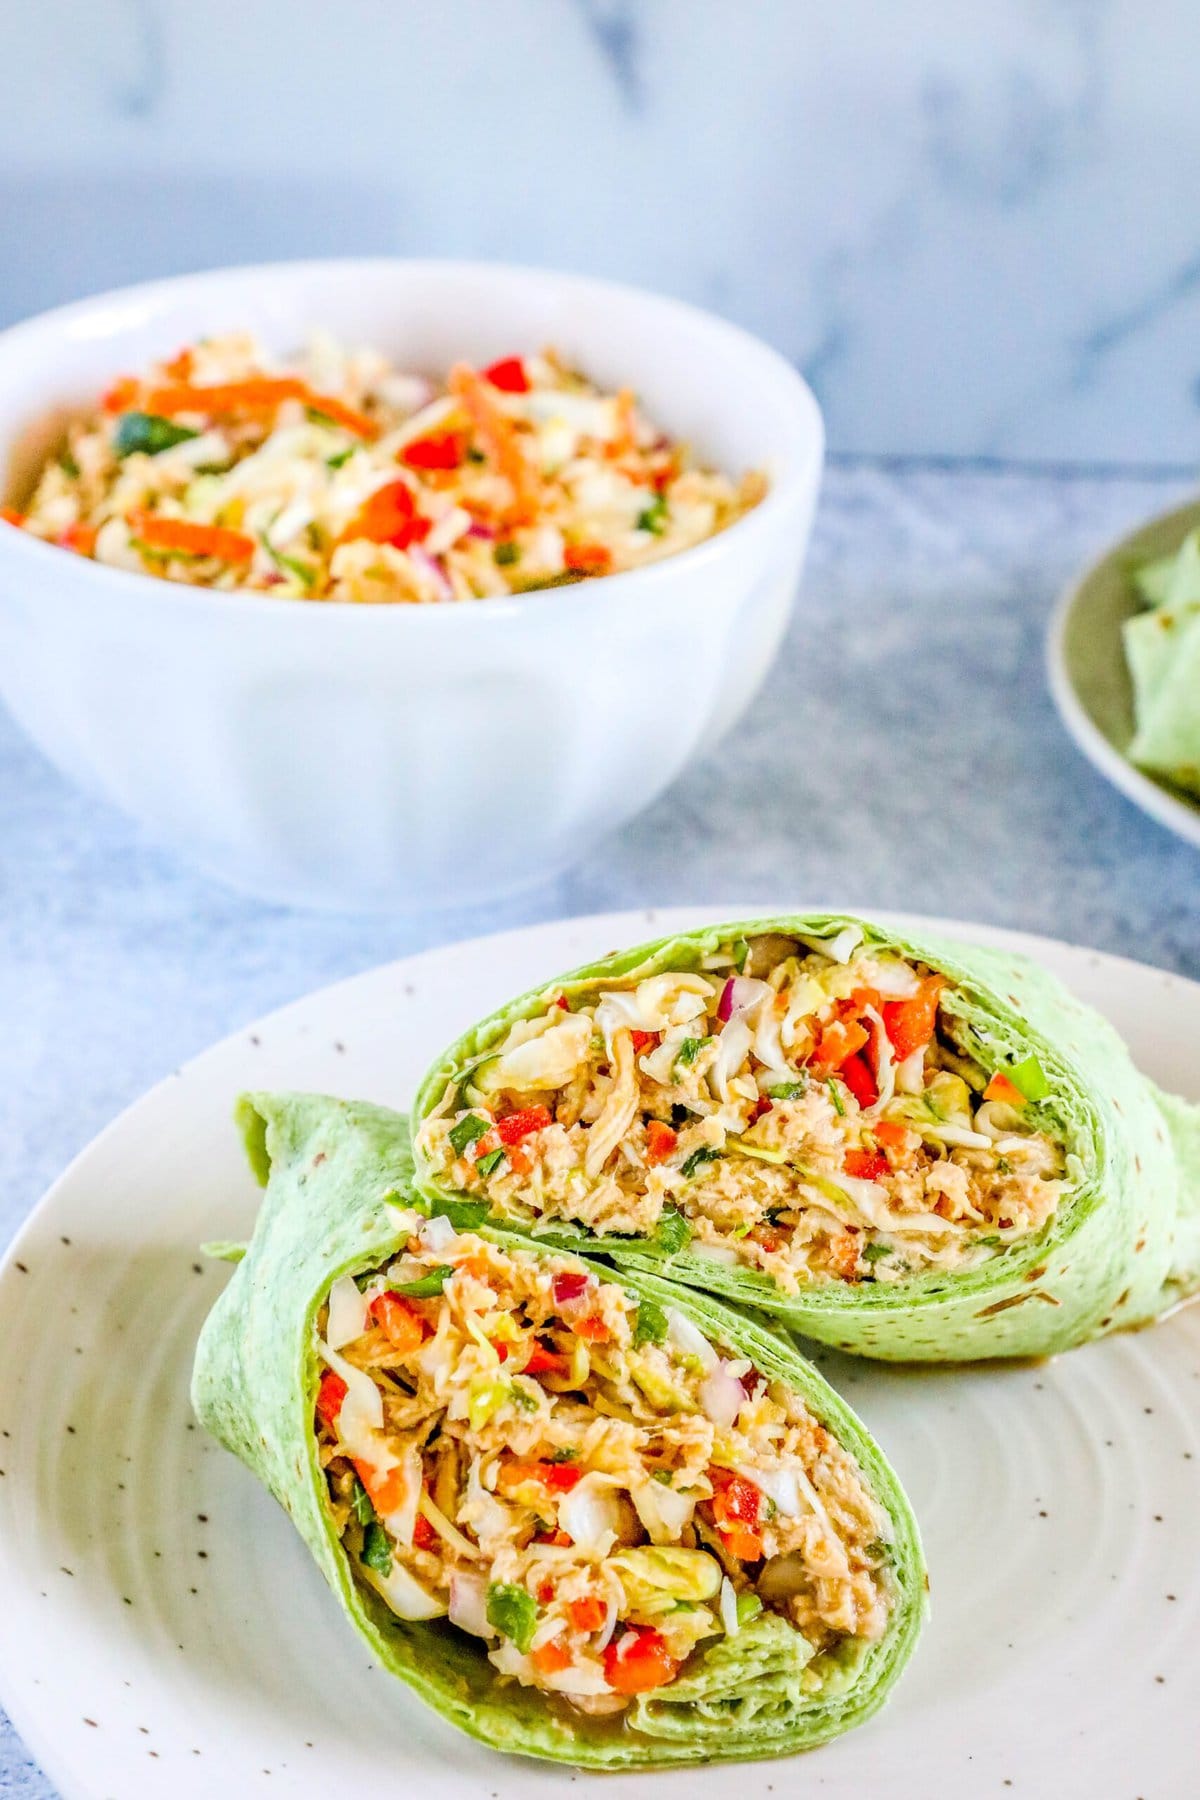 chicken salad with shredded chicken, cabbage, and diced vegetables wrapped in a green tortilla sliced in half on a plate in front of a bowl of chicken salad